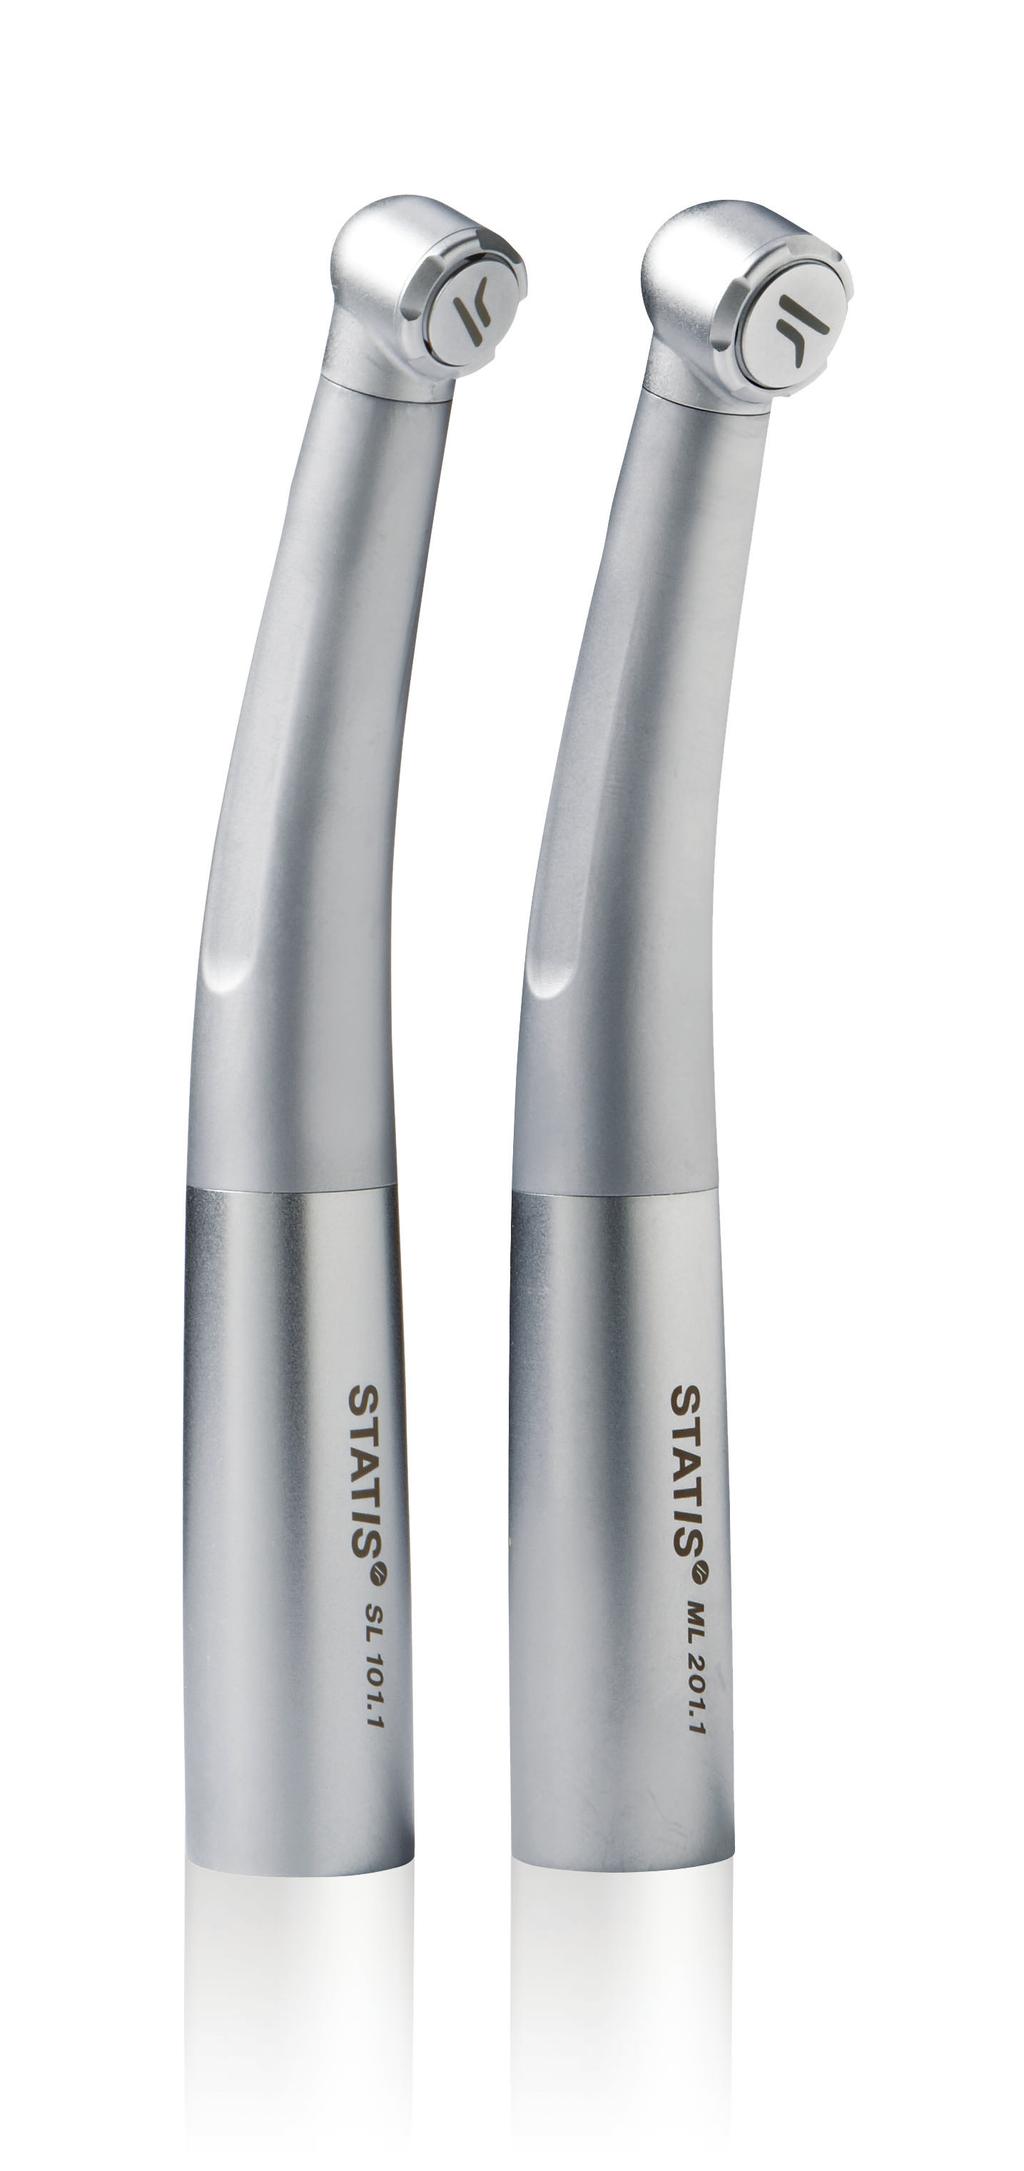 AIR-DRIVEN HANDPIECES STATIS Air-driven high-speeds. Designed without compromise.